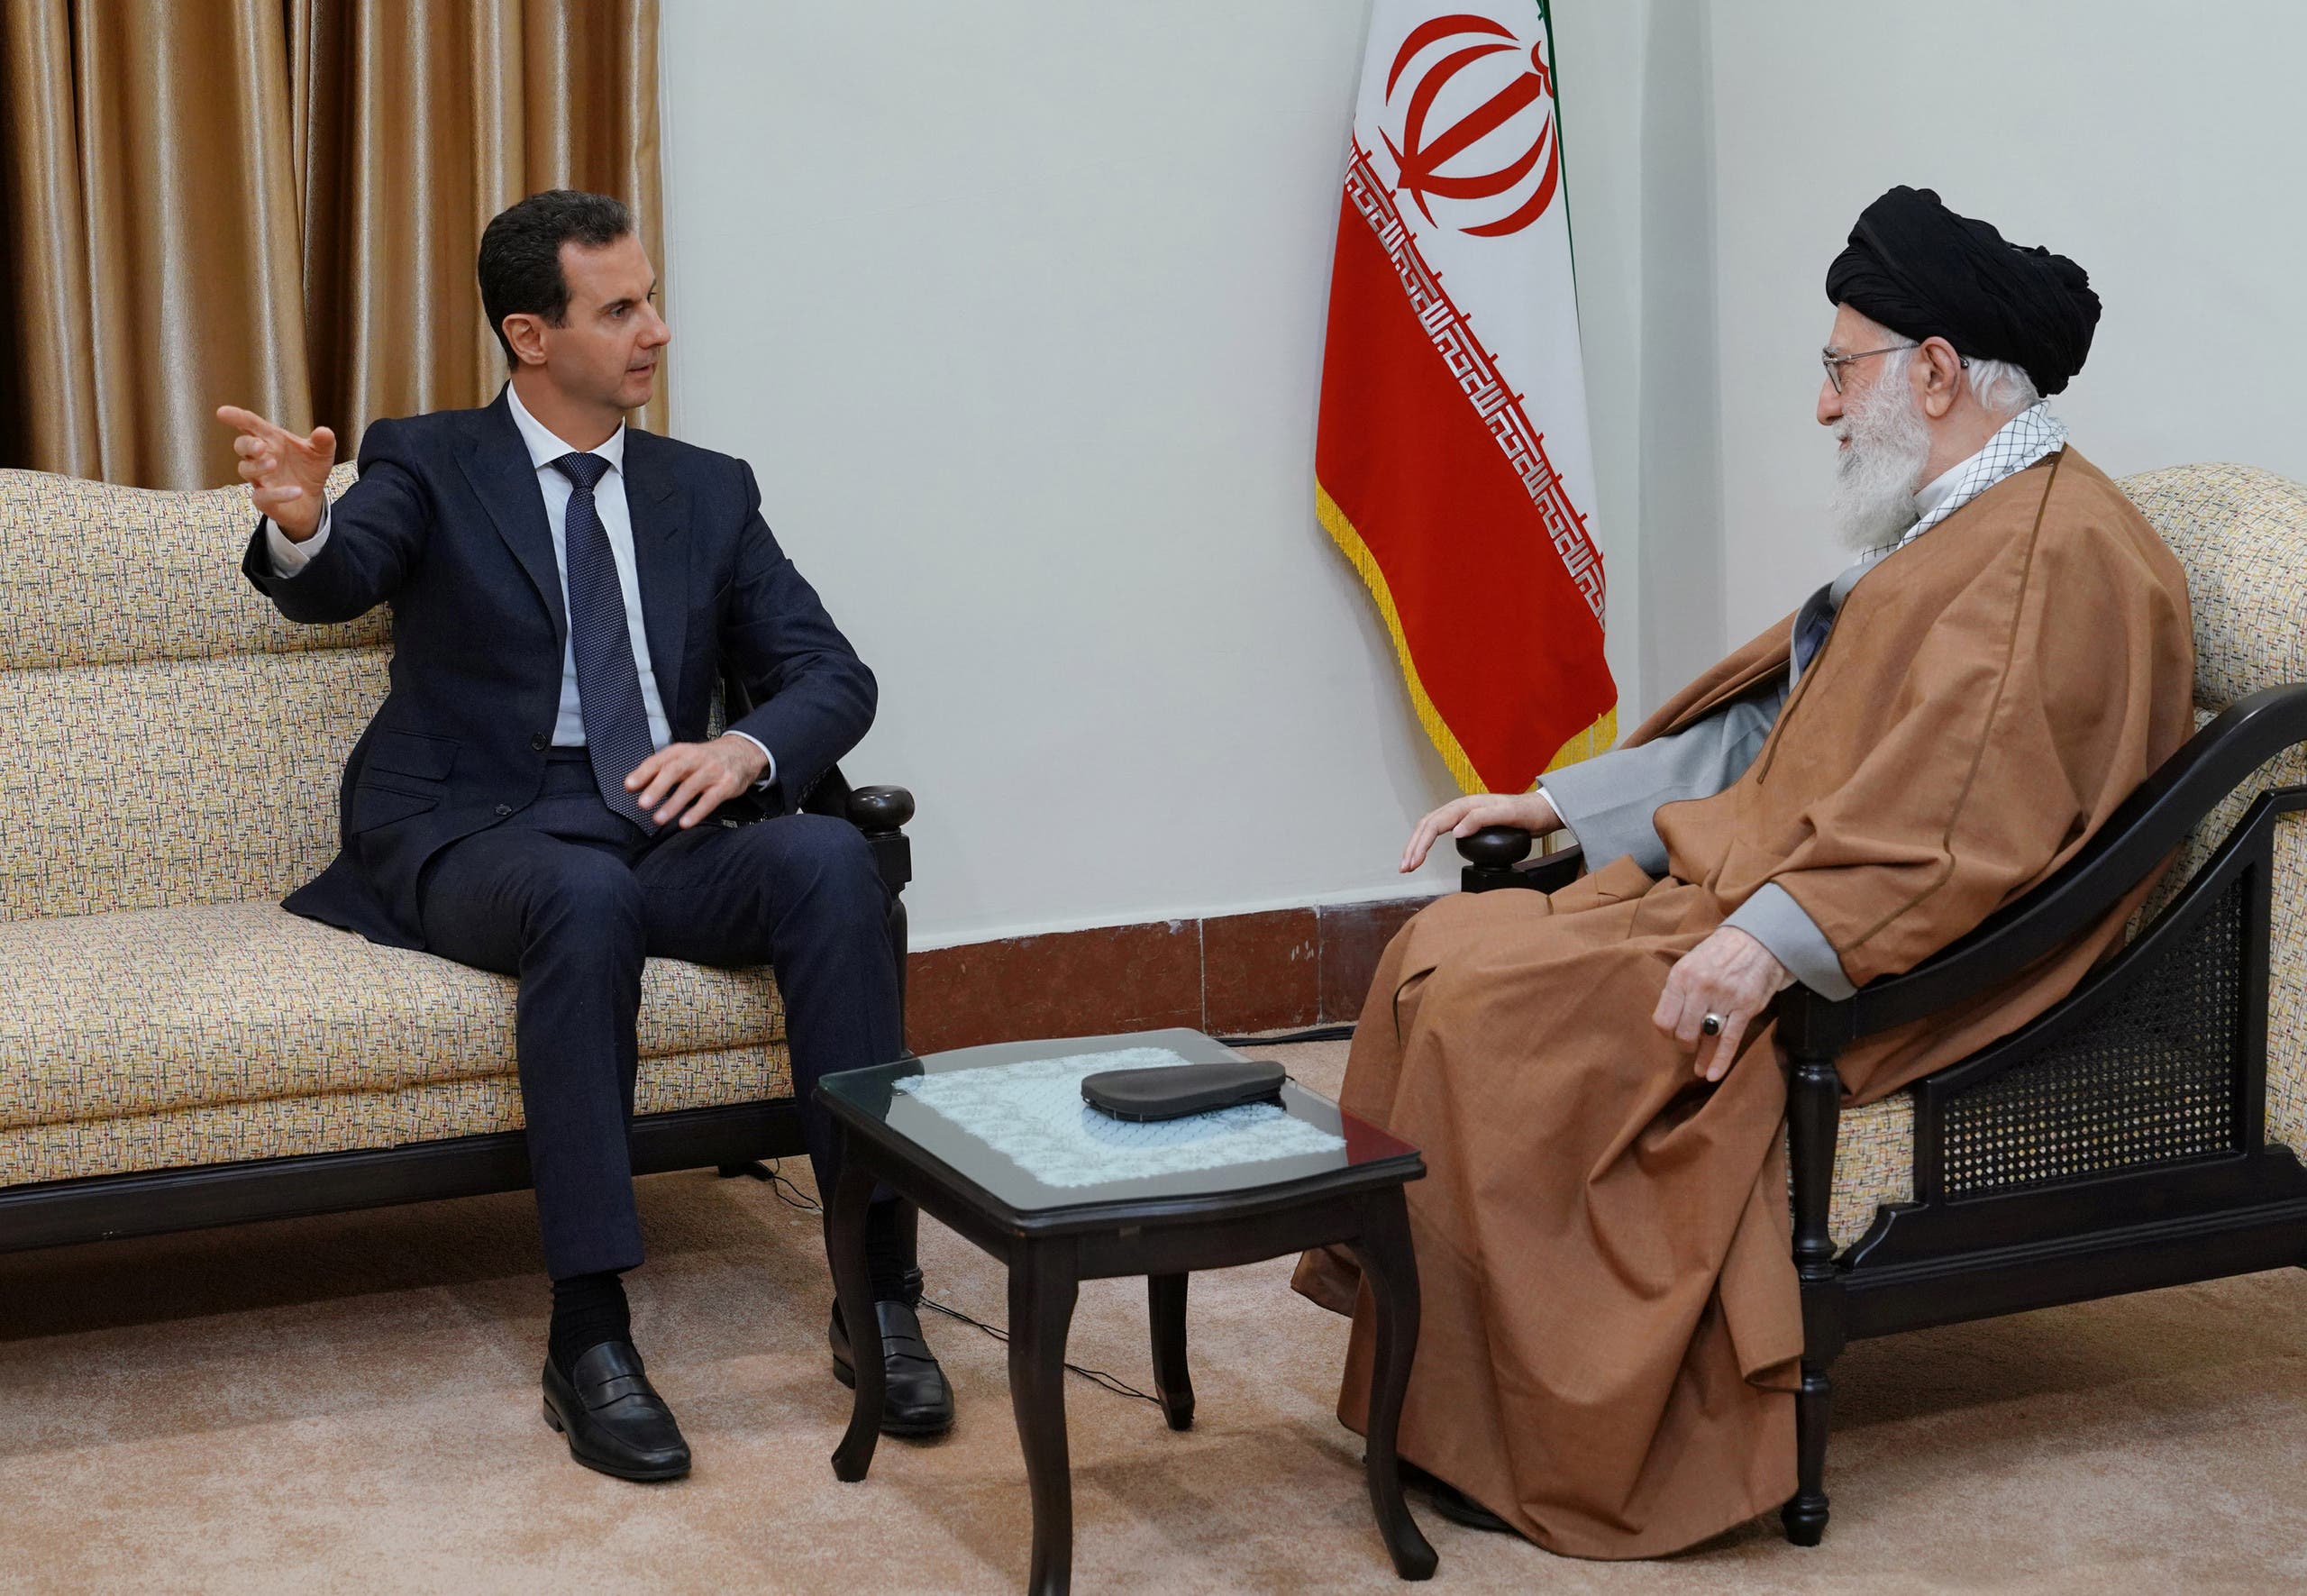 Syria's President Bashar al-Assad meets with Iranian Supreme Leader Ayatollah Ali Khamenei in Tehran, Iran in this handout released by SANA on February 25, 2019. 